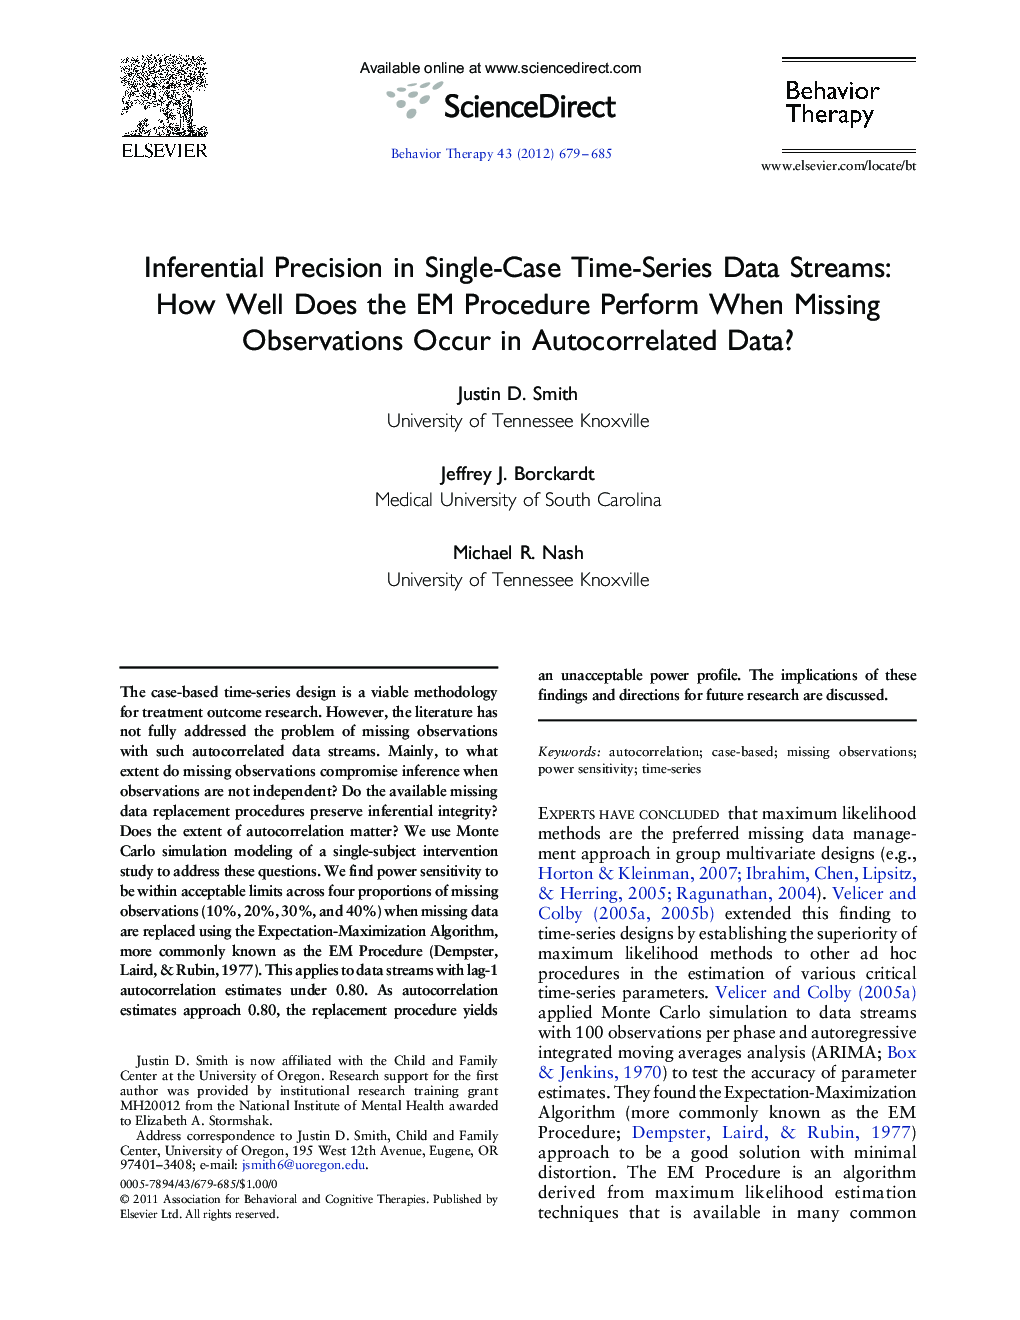 Inferential Precision in Single-Case Time-Series Data Streams: How Well Does the EM Procedure Perform When Missing Observations Occur in Autocorrelated Data? 